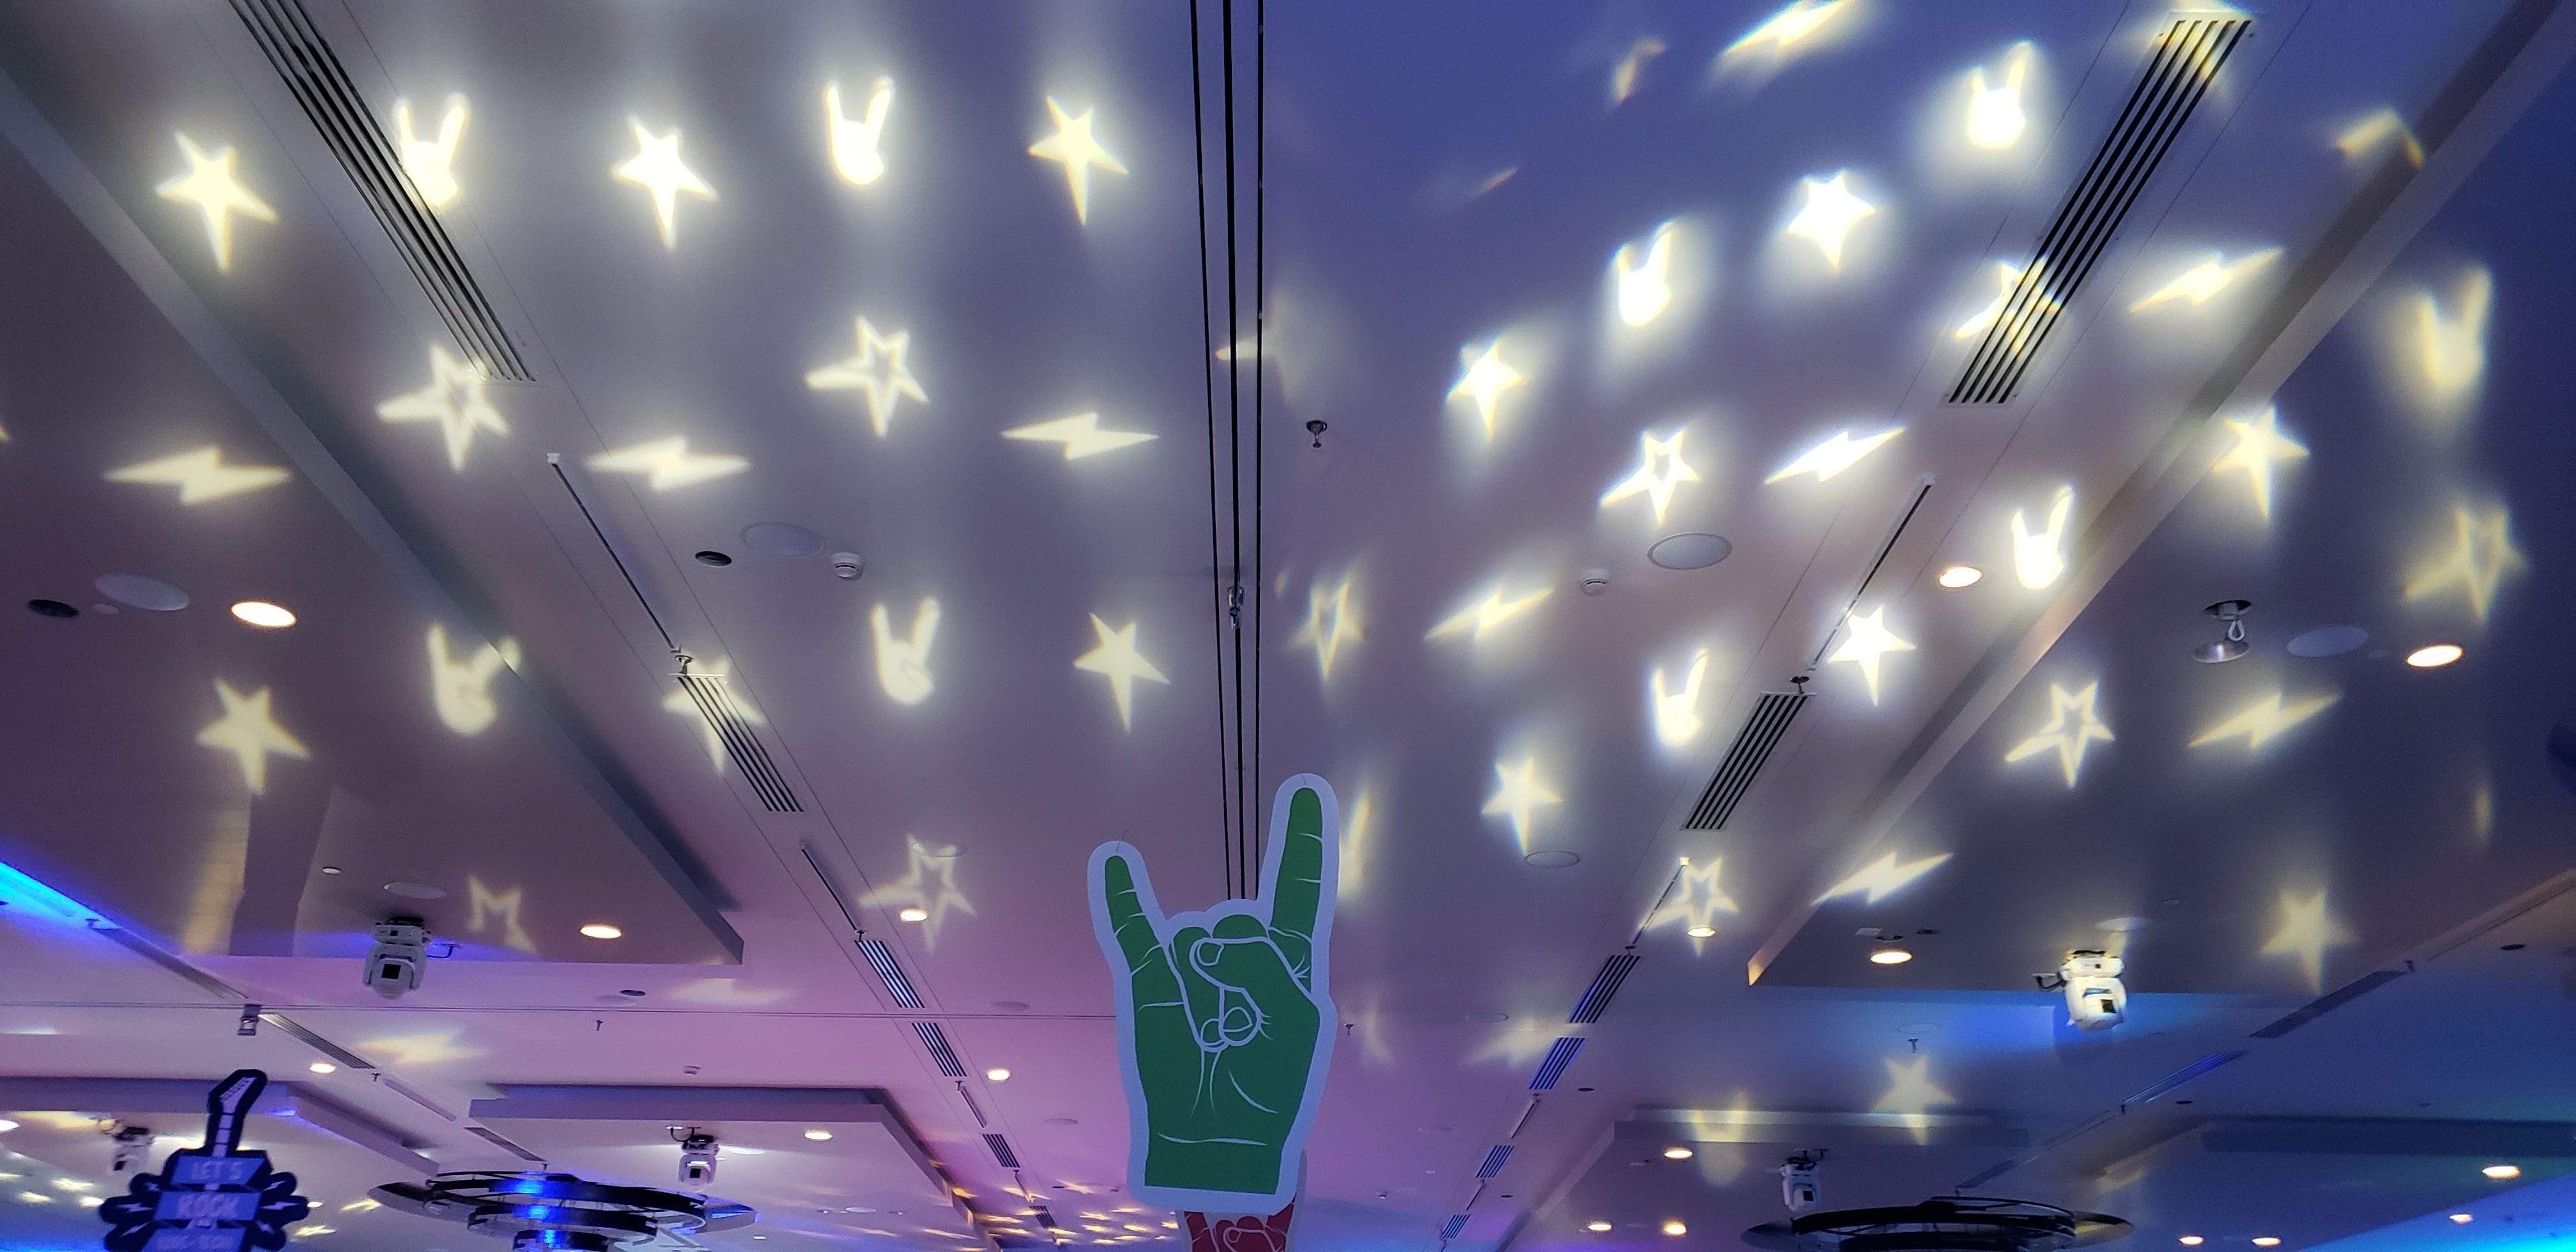 a Let's Rock themed break up pattern projection on the ceiling.